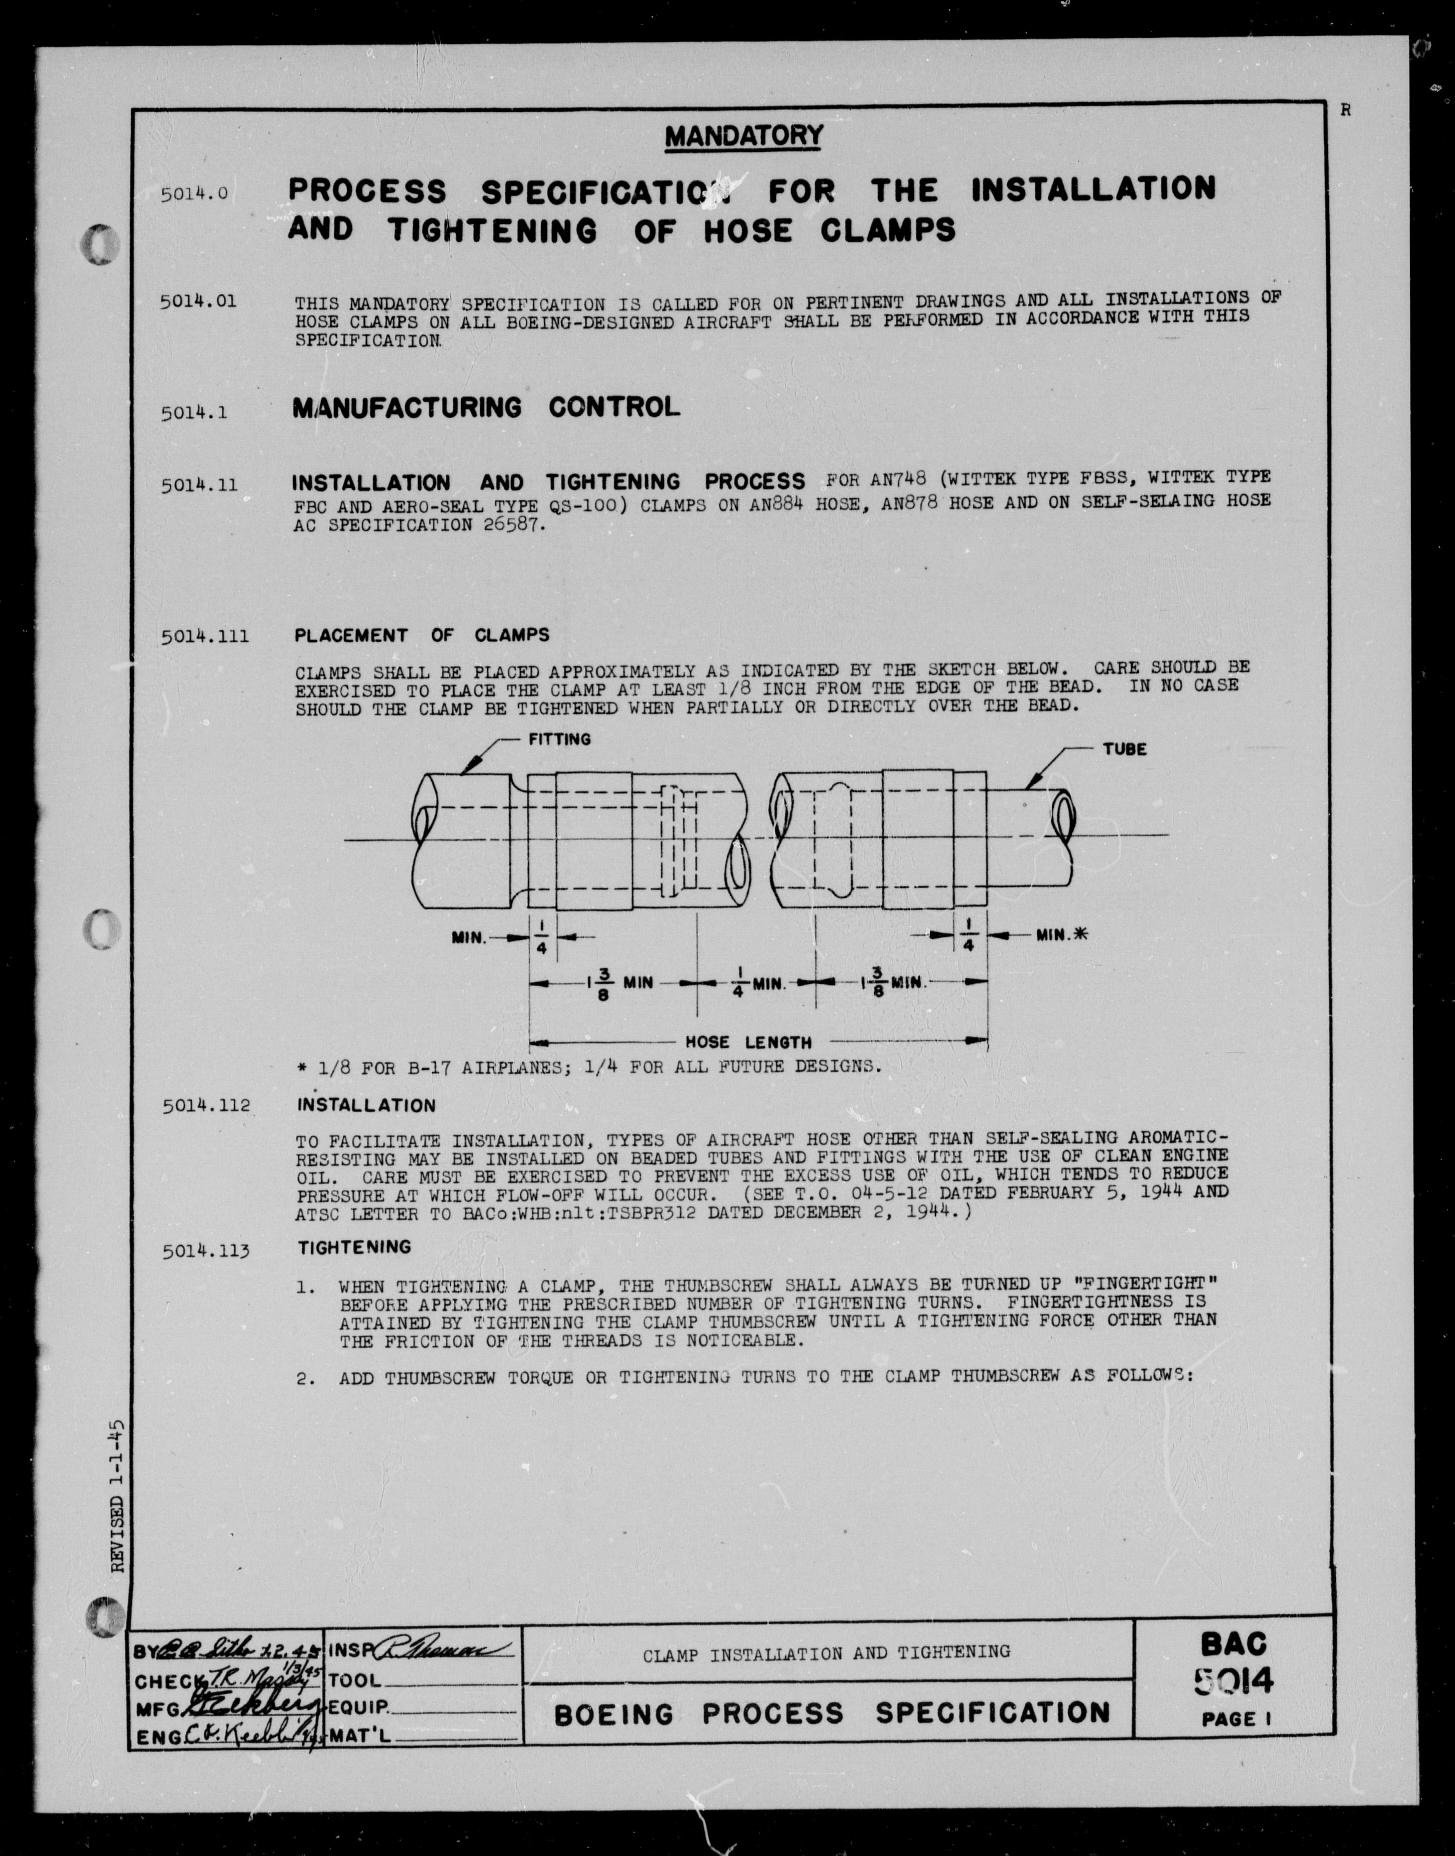 Sample page 1 from AirCorps Library document: Clamp Installation and Tightening